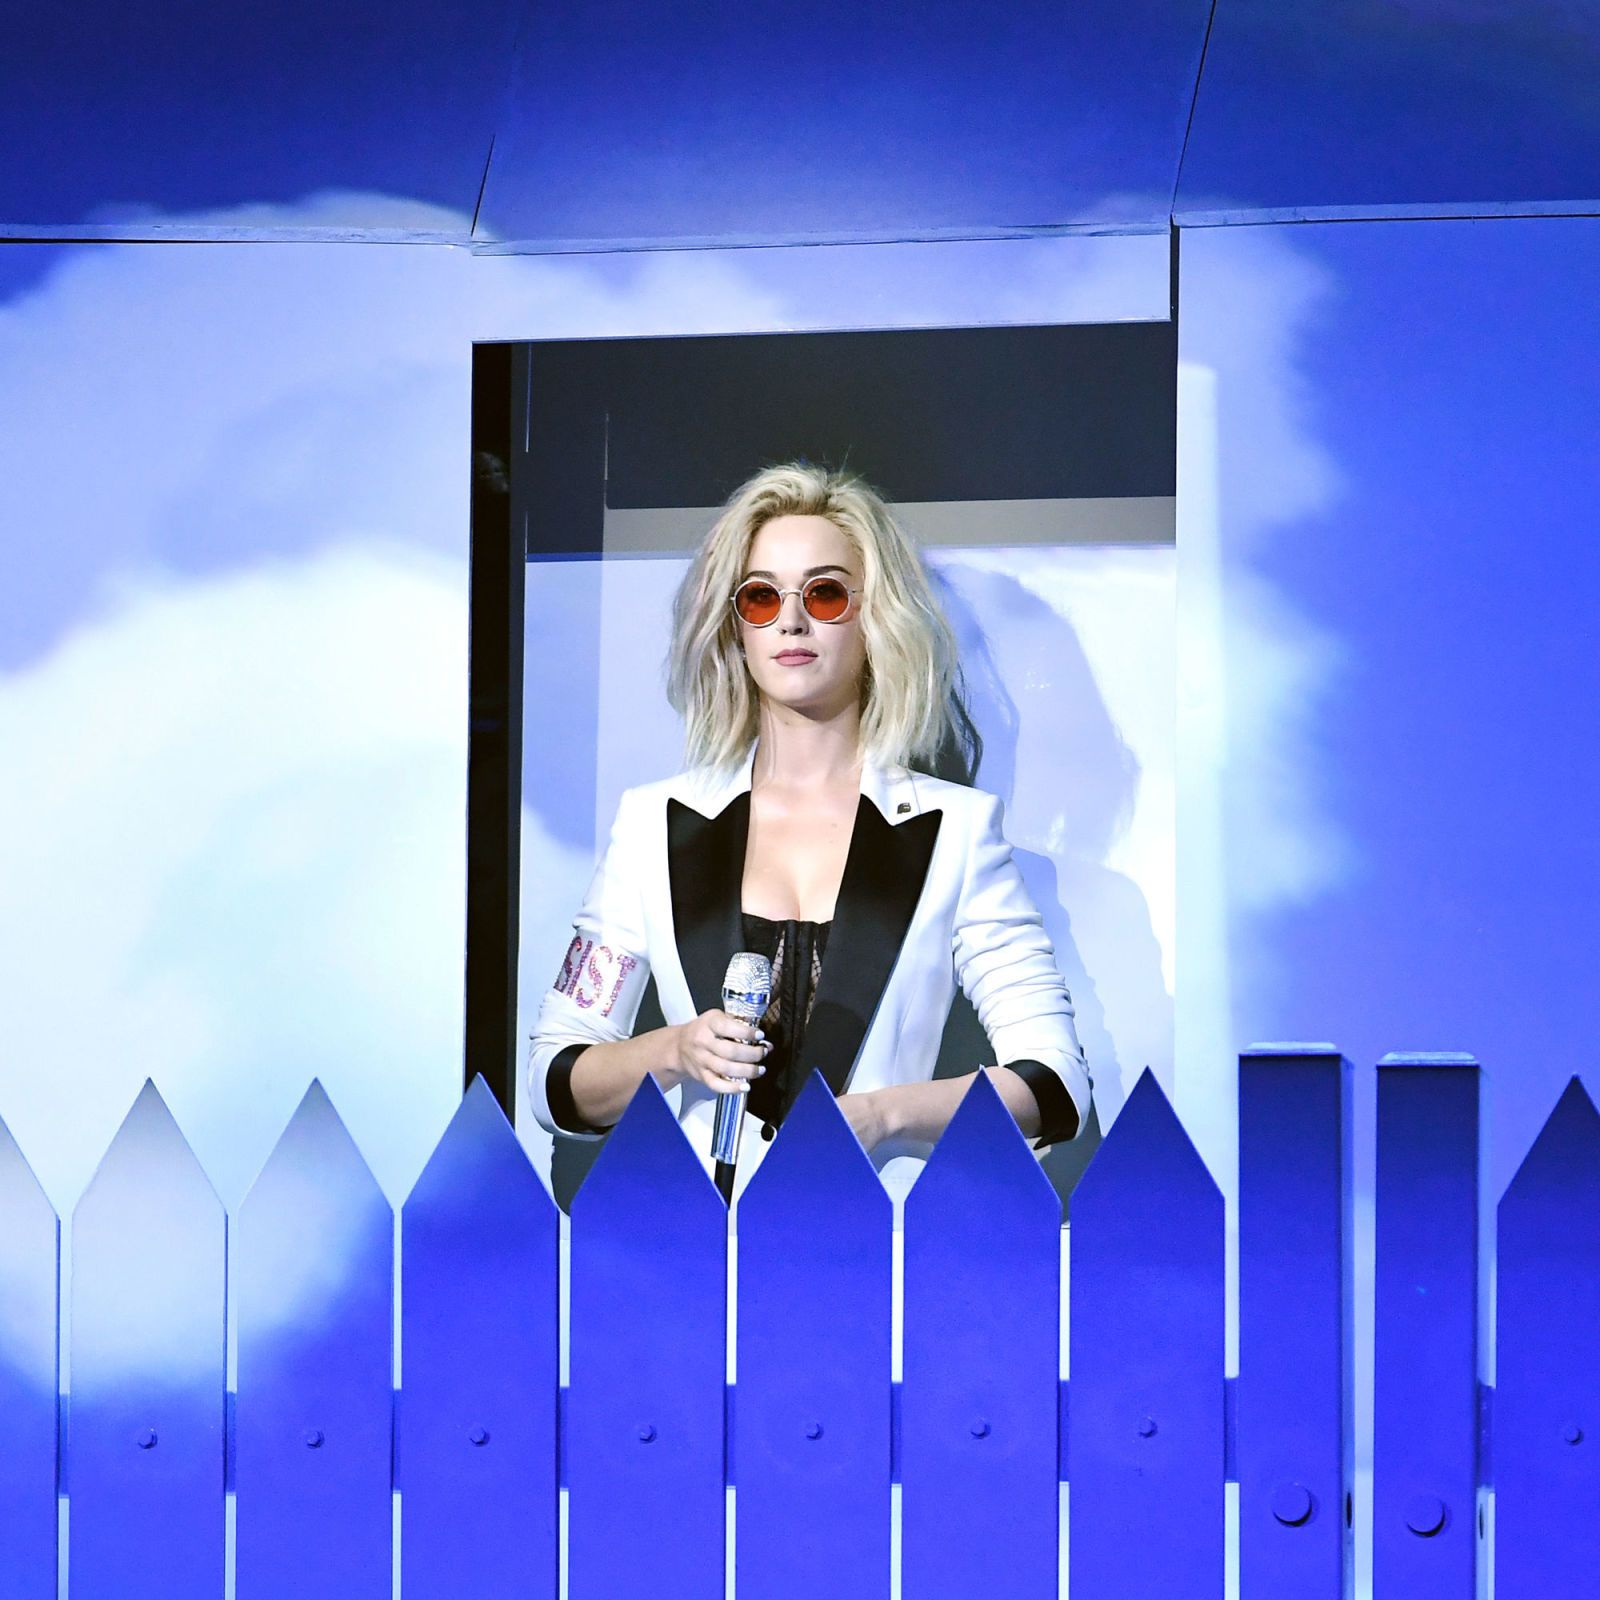 Katy Perry Just Performed an Amazing New Song at the Grammys